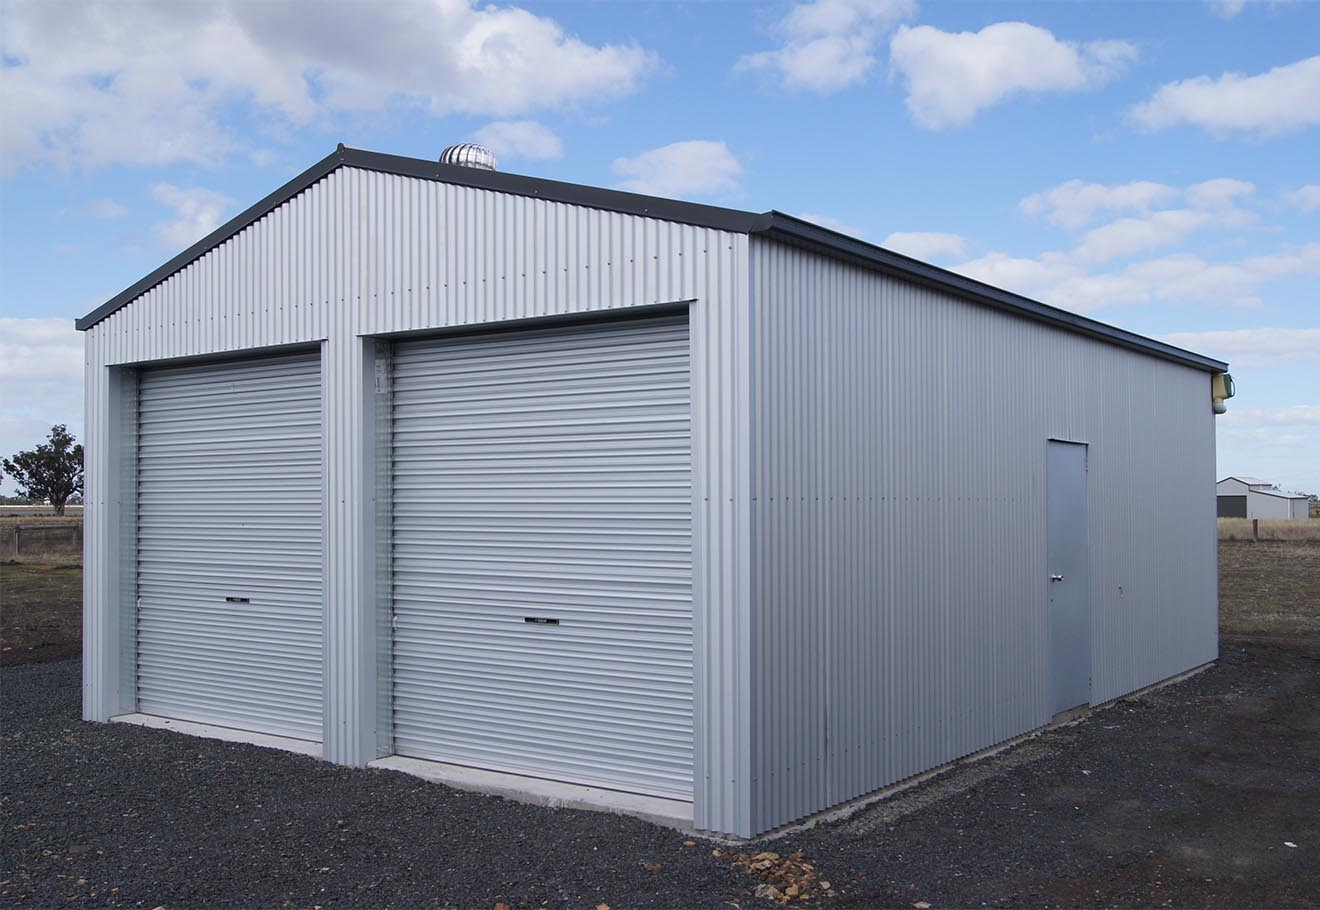 Two door zinc residential shed